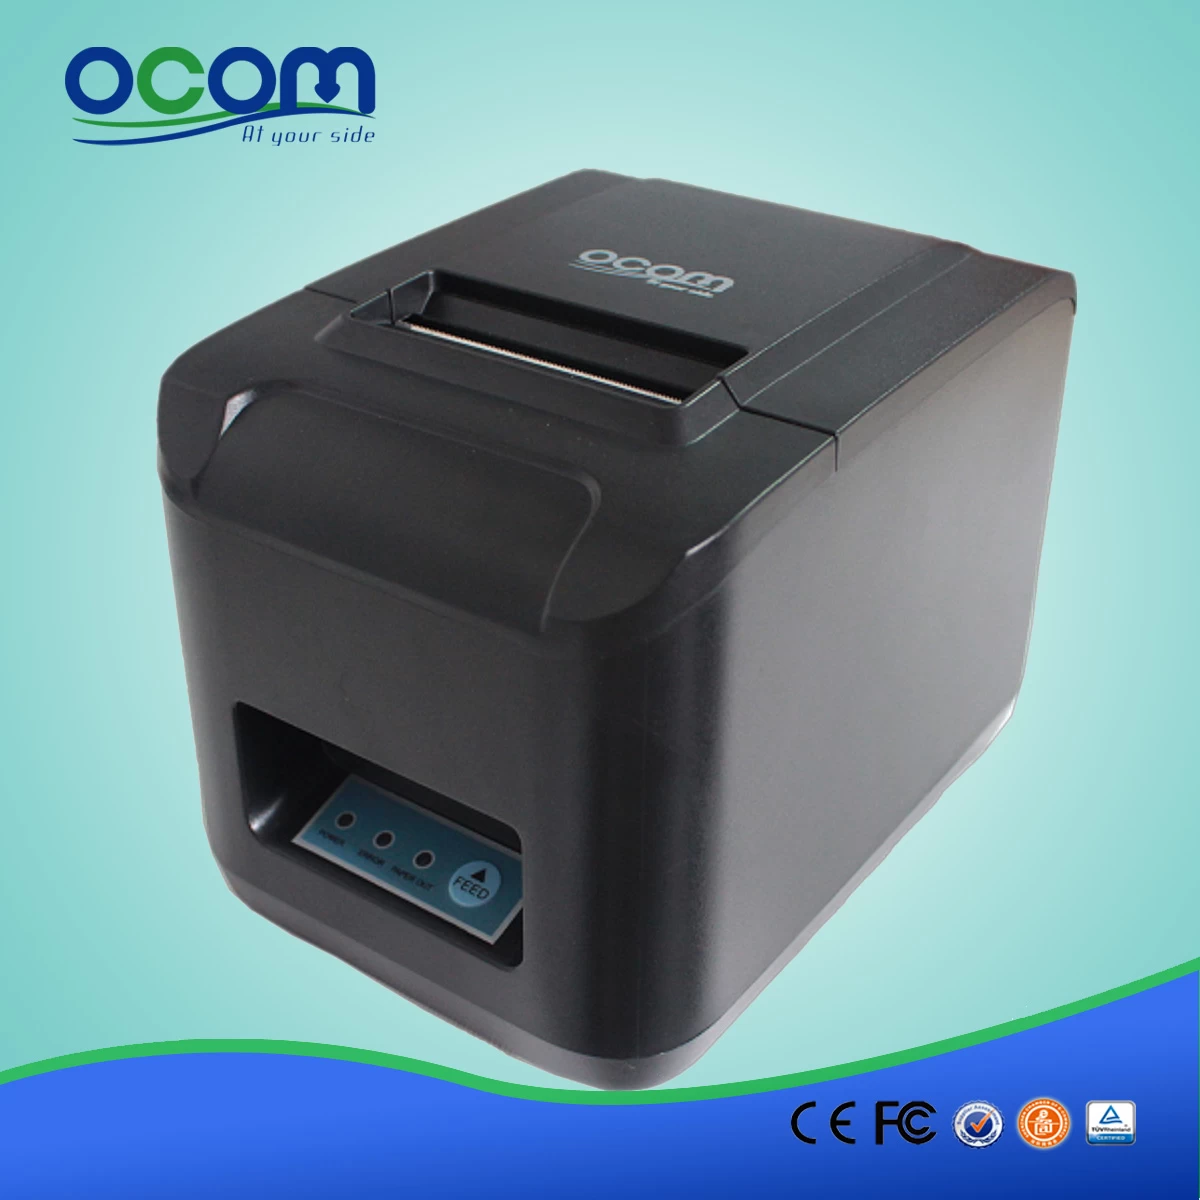 Auto cutter pos 80mm mobile thermal receipt printer